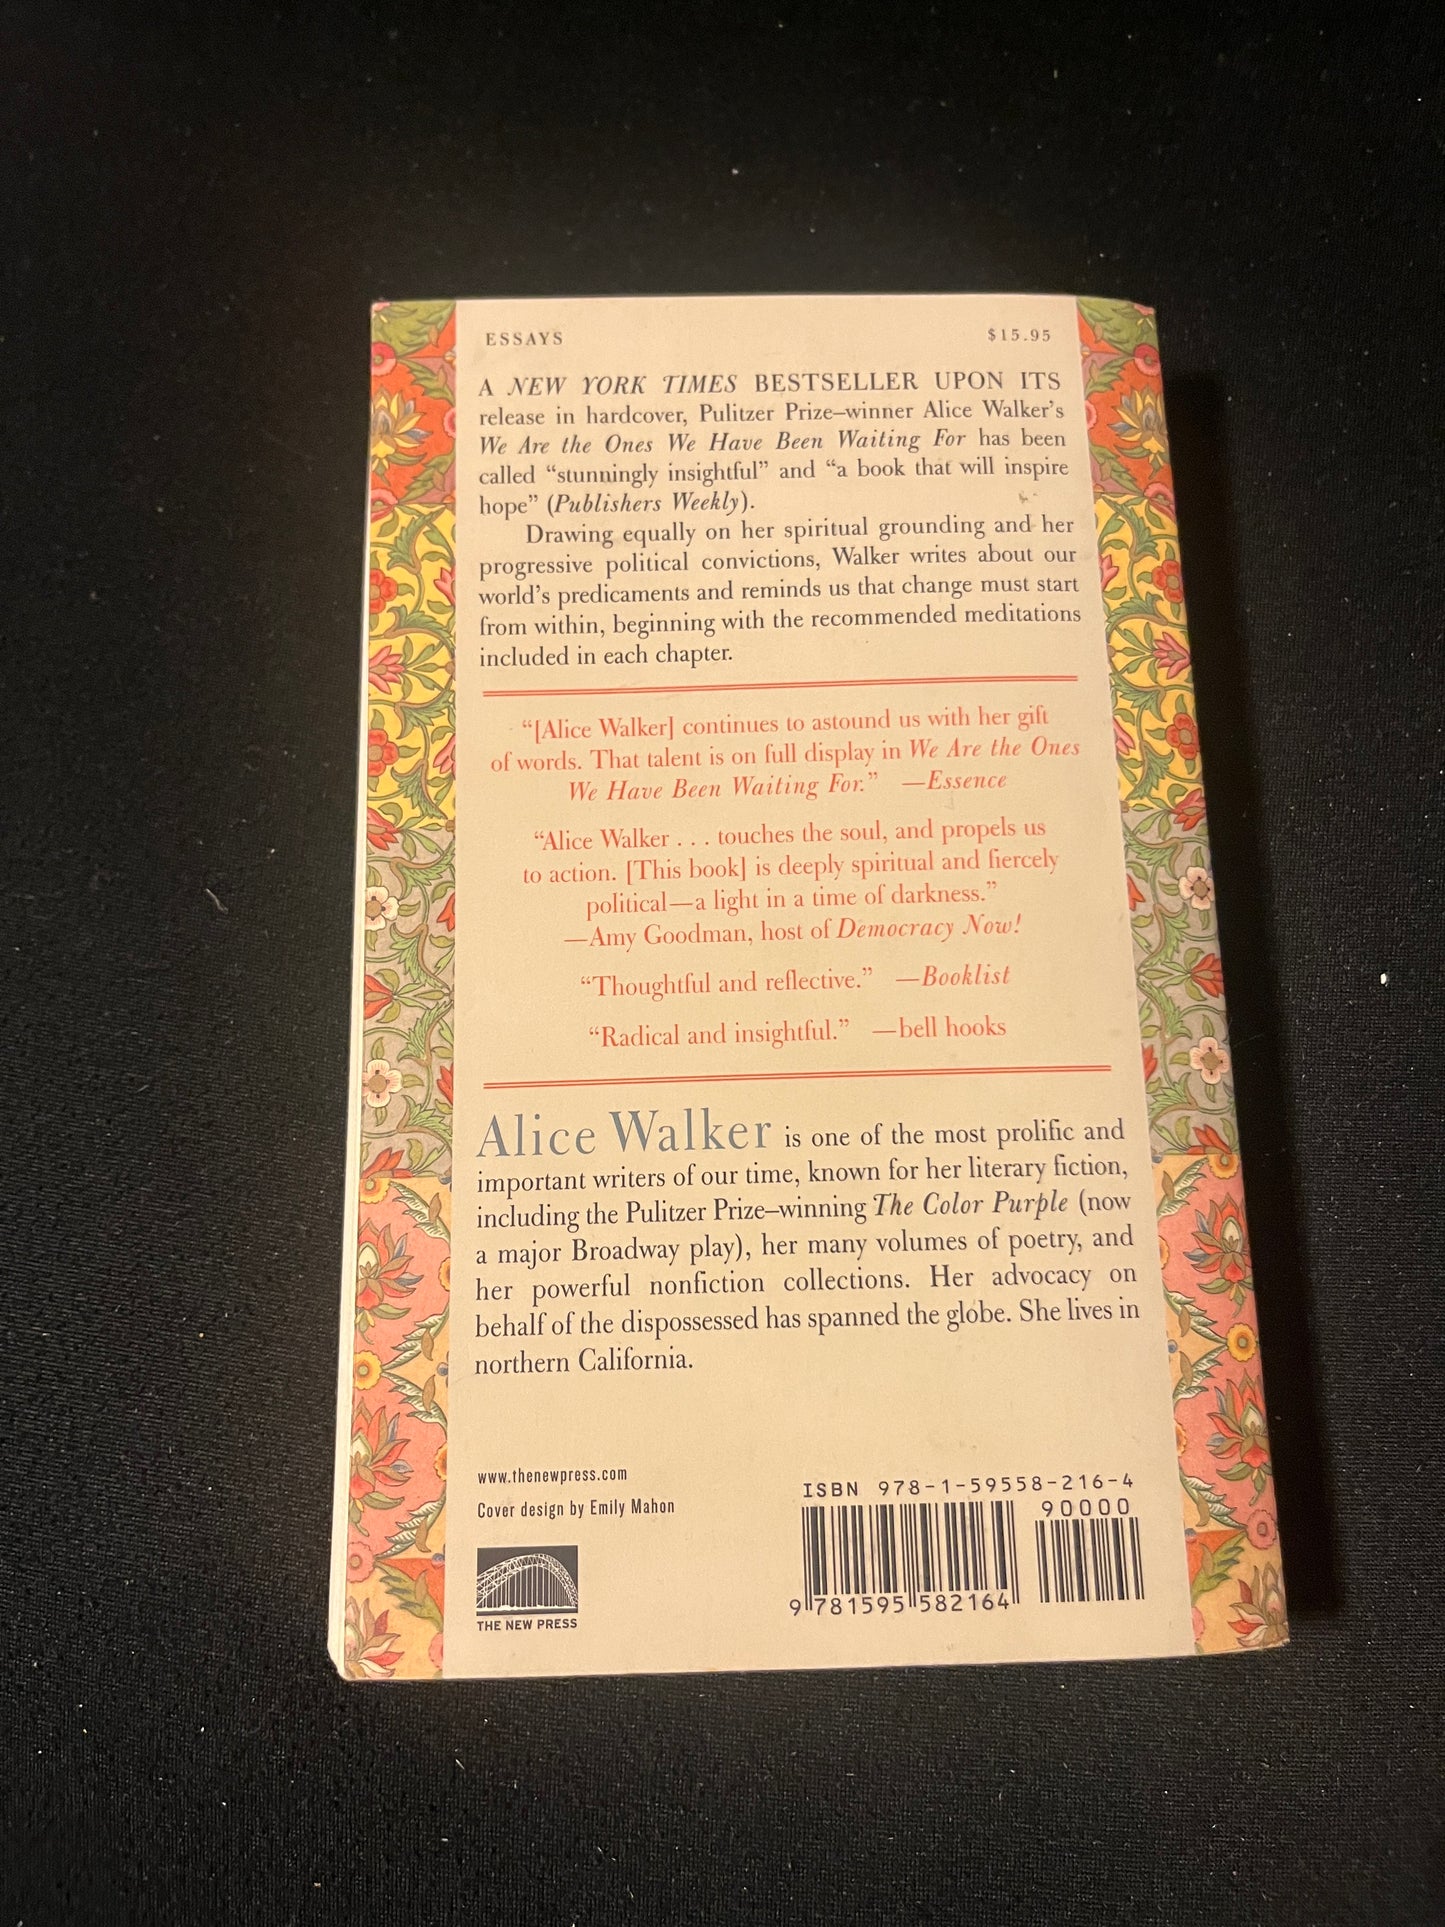 WE ARE THE ONES WE HAVE BEEN WAITING FOR: INNER LIGHT IN THE DARKNESS by Alice Walker